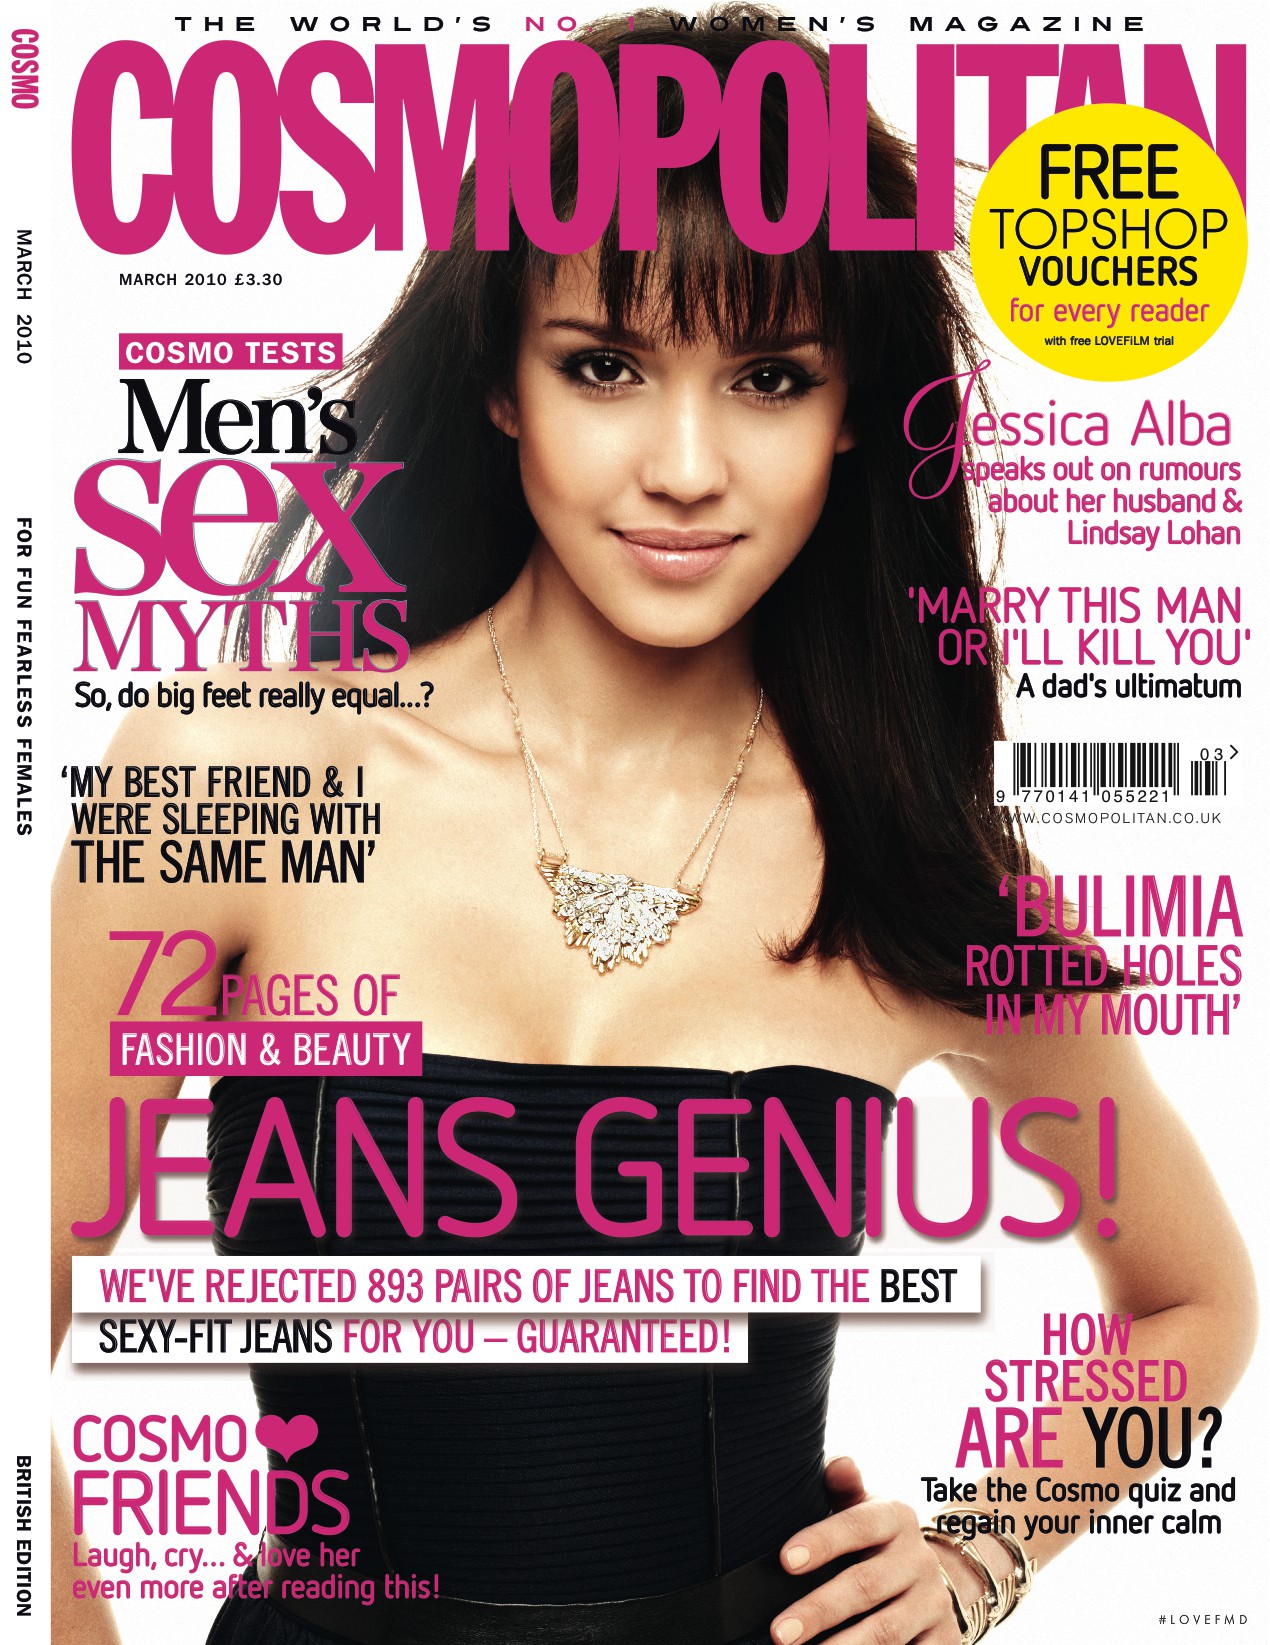 Cover of Cosmopolitan UK with Jessica Alba, March 2010 (ID:4589 ...